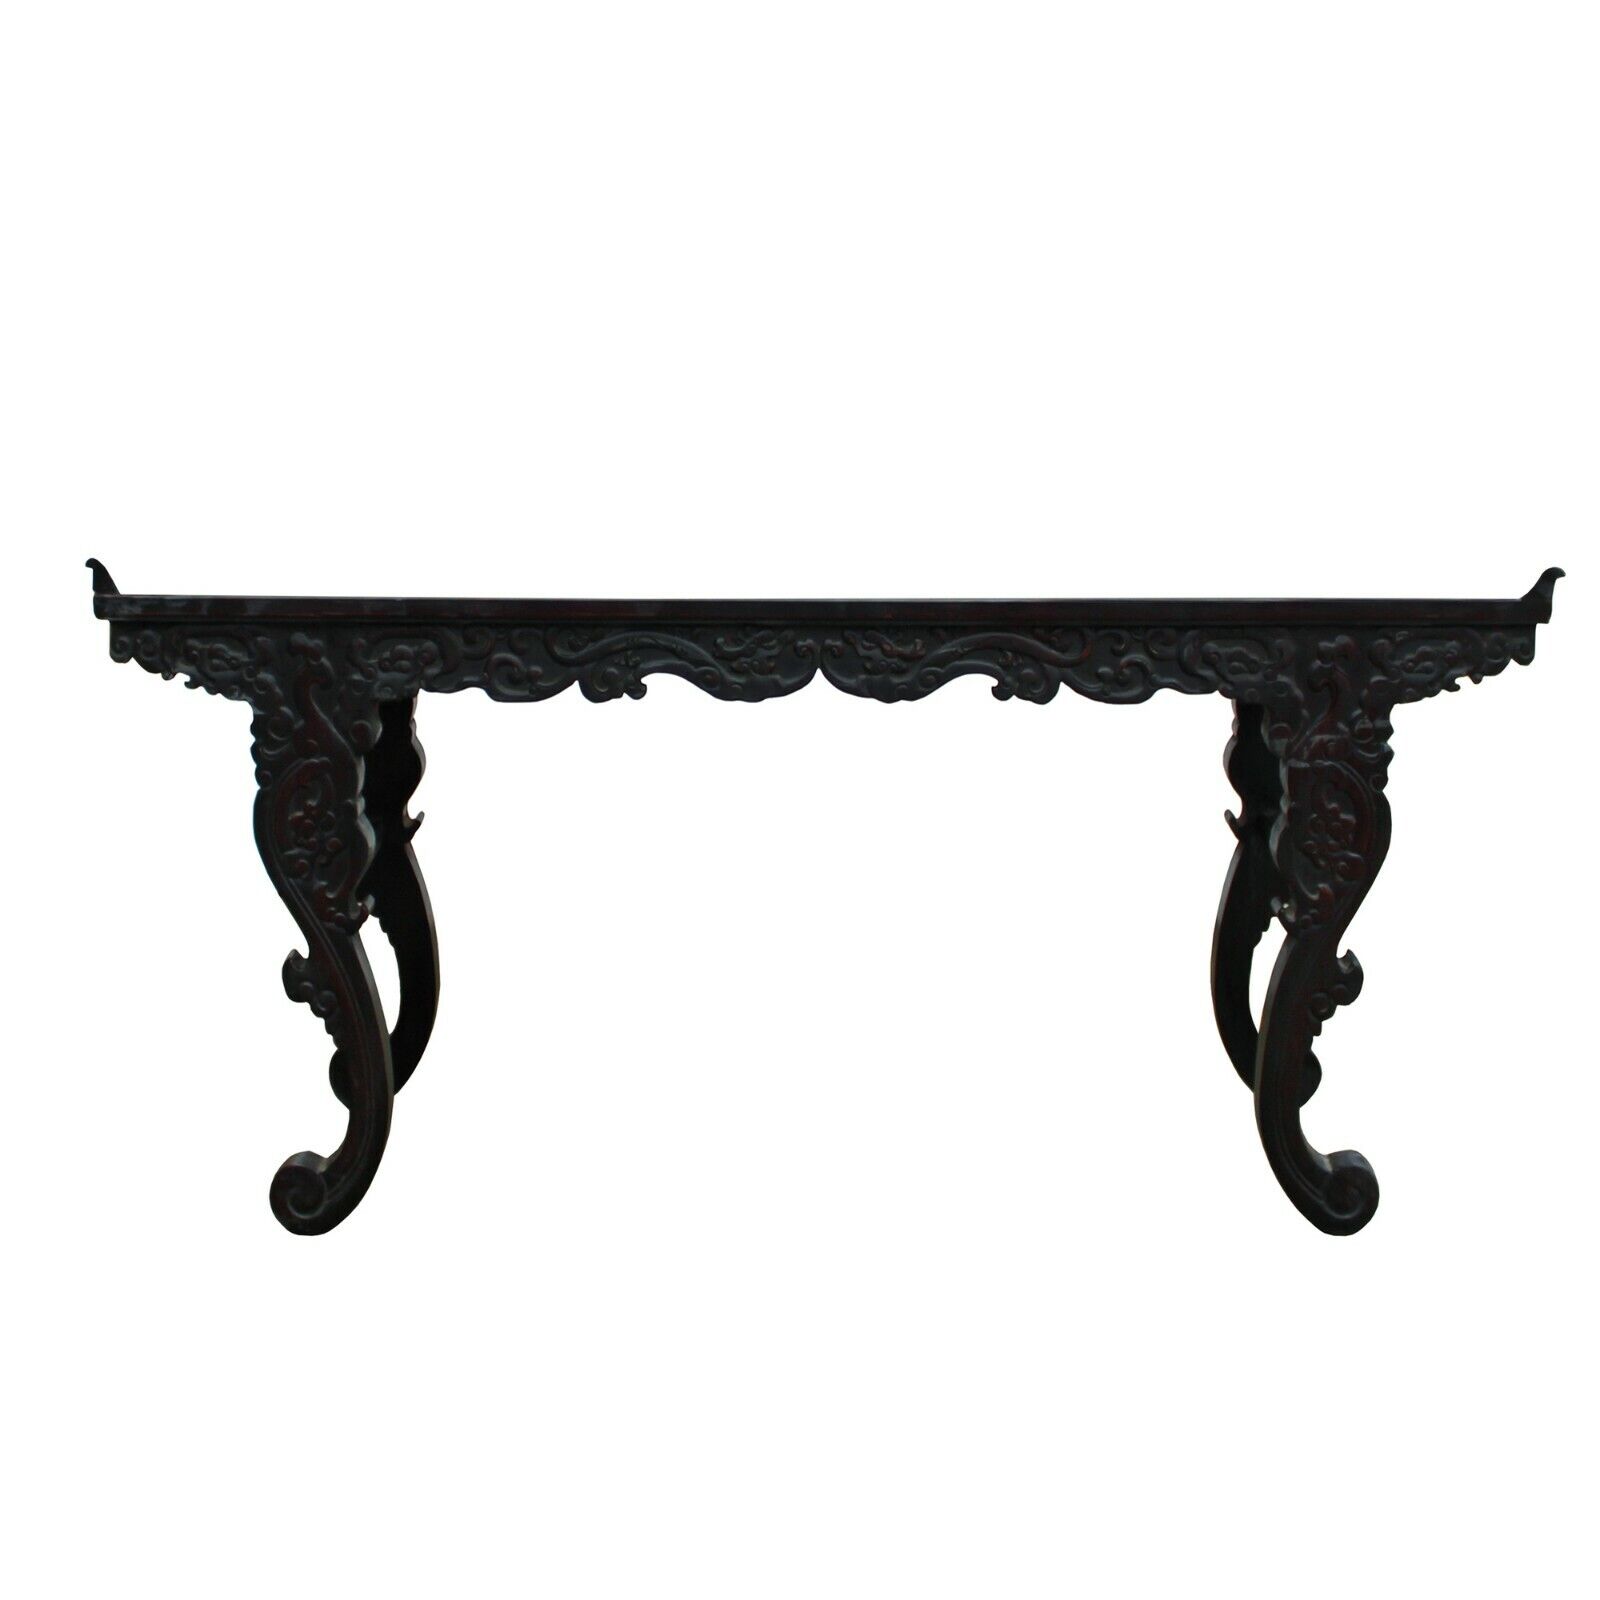 Chinese Brown Huali Rosewood Point Edge Relief Carving Altar Table cs4897 Handmade Does Not Apply